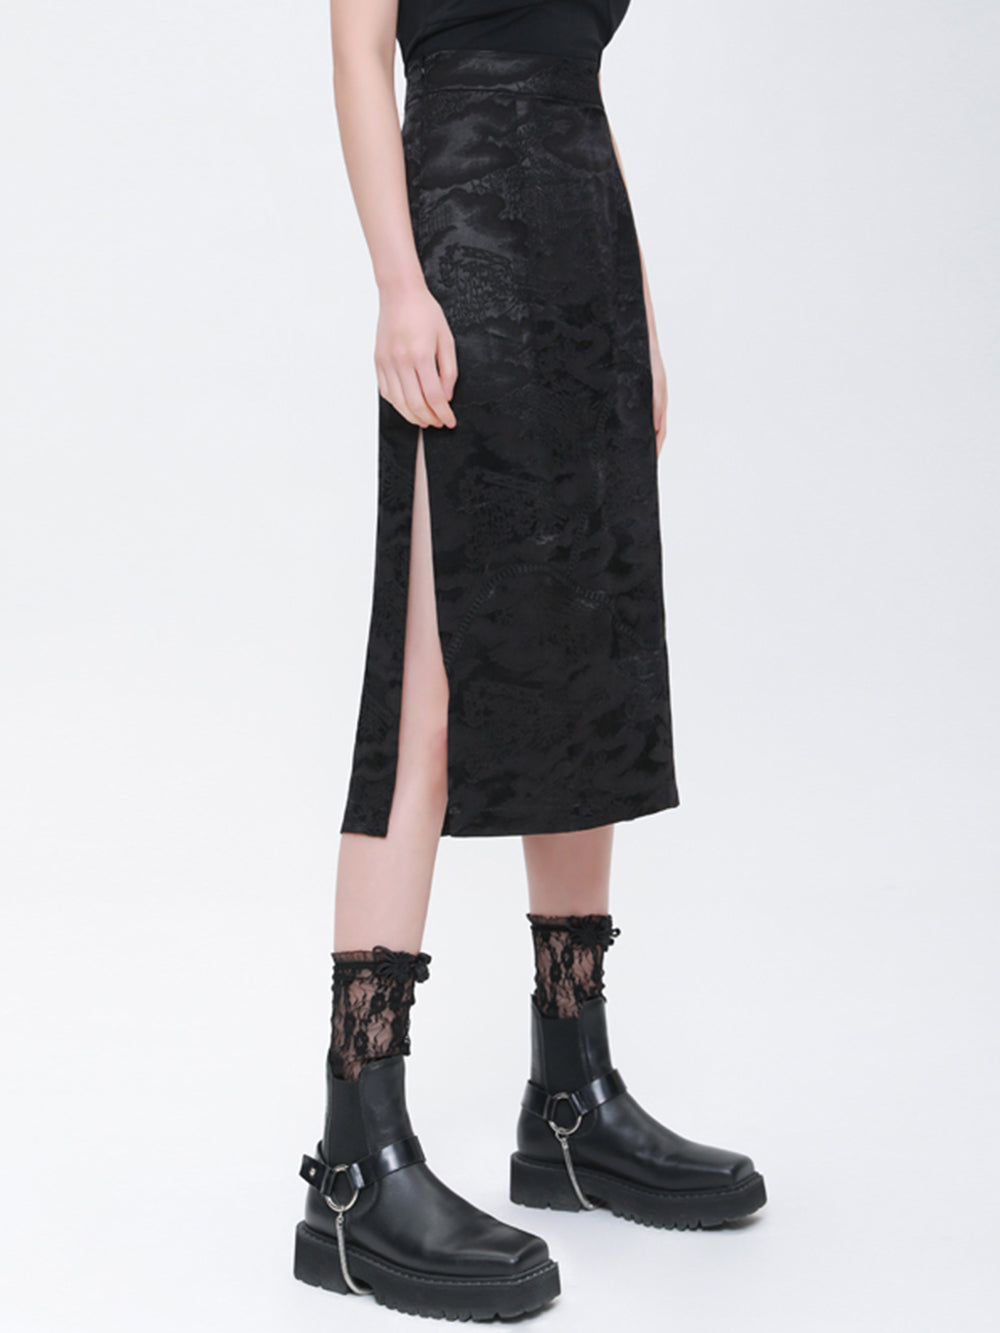 MUKTANK×CUUDICLAB Silk Hollowed-out Skirts